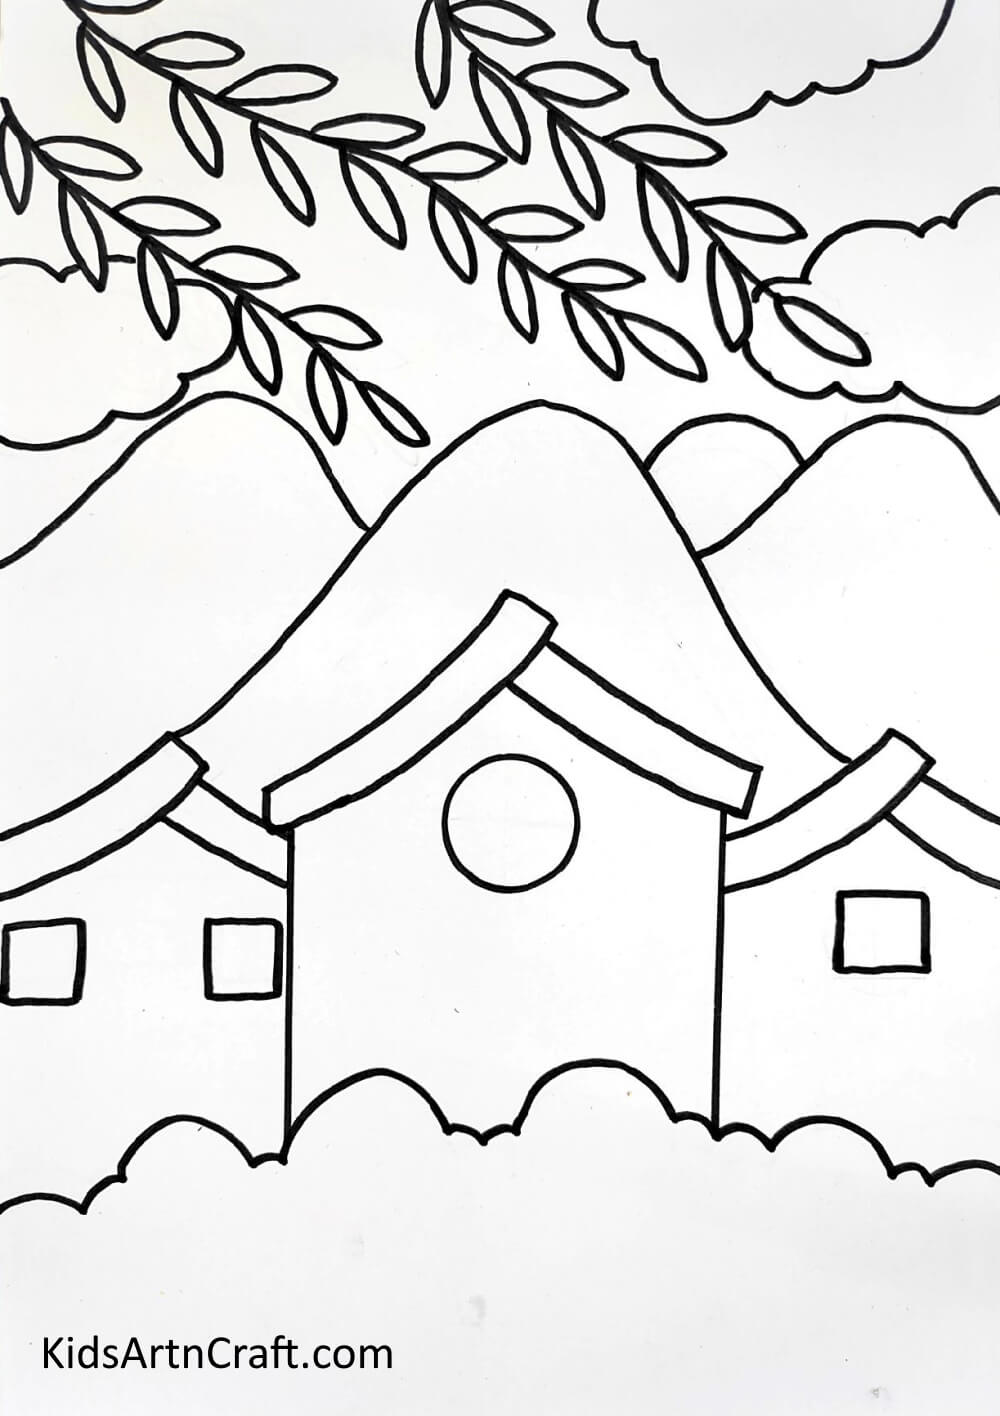 Drawing Clouds and Leaves - Appealing Natural Landscape Representations For Novices